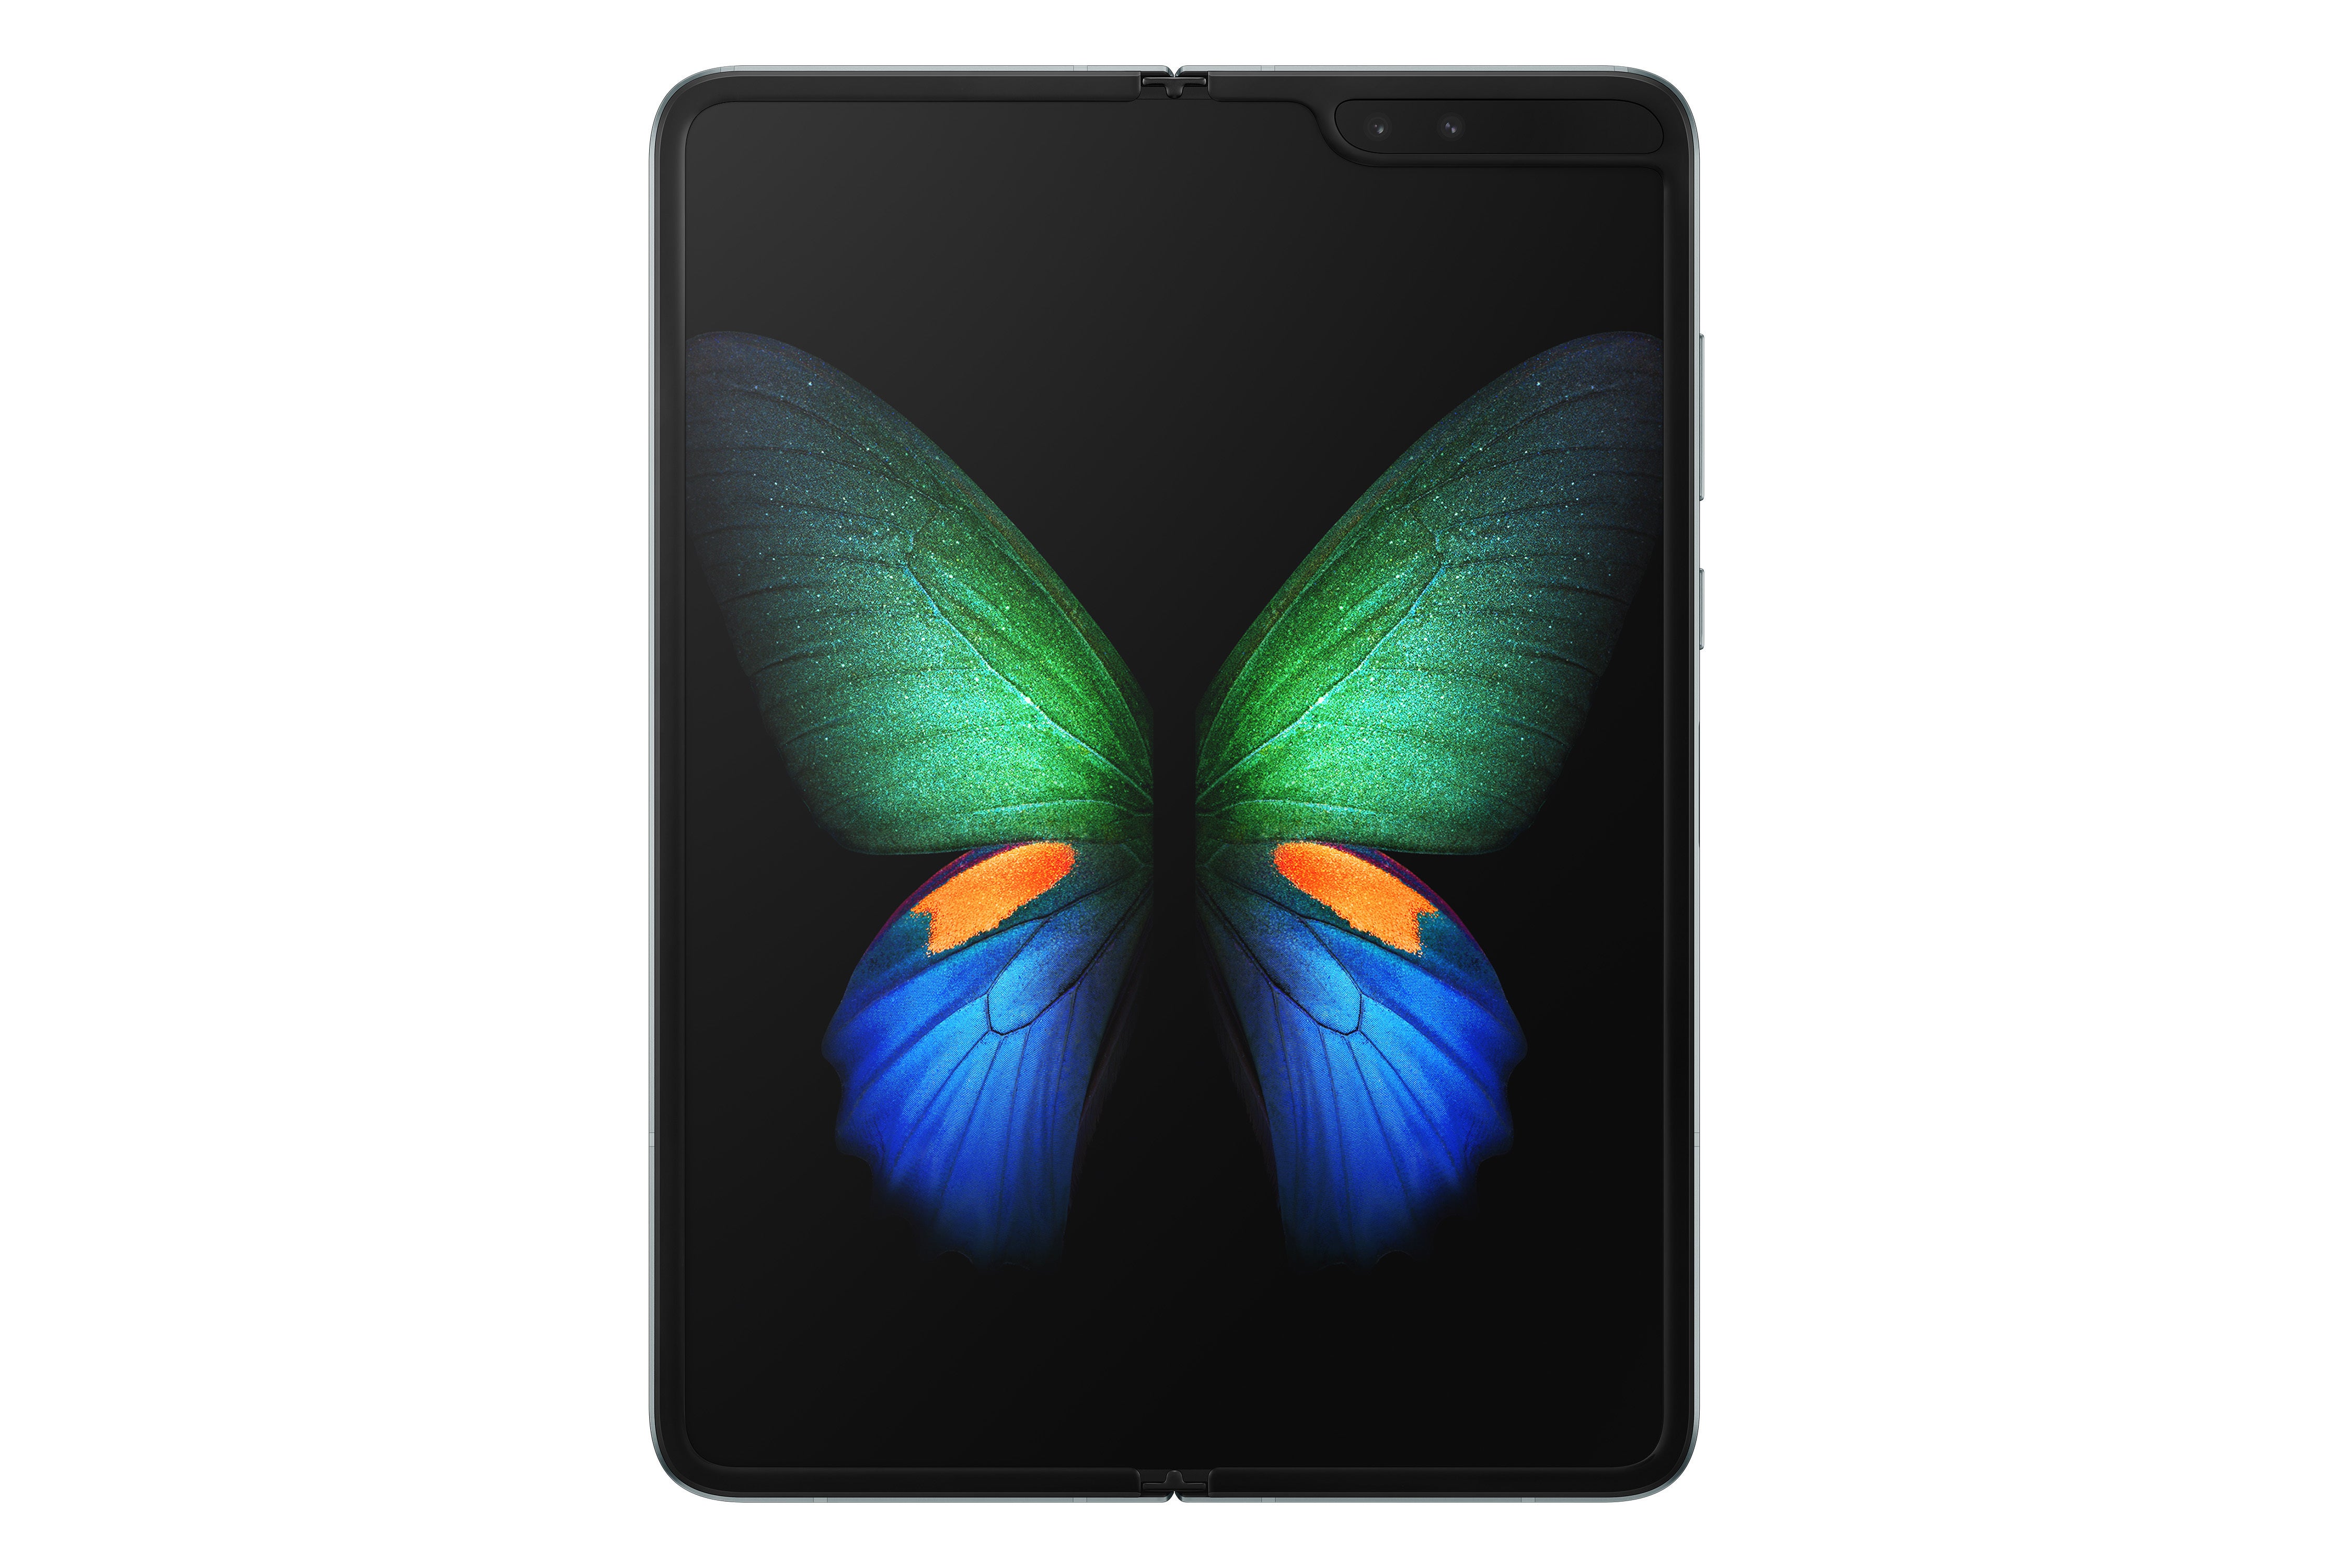 The Samsung Galaxy Fold will be released sometime in September - Samsung announces September launch of the Galaxy Fold